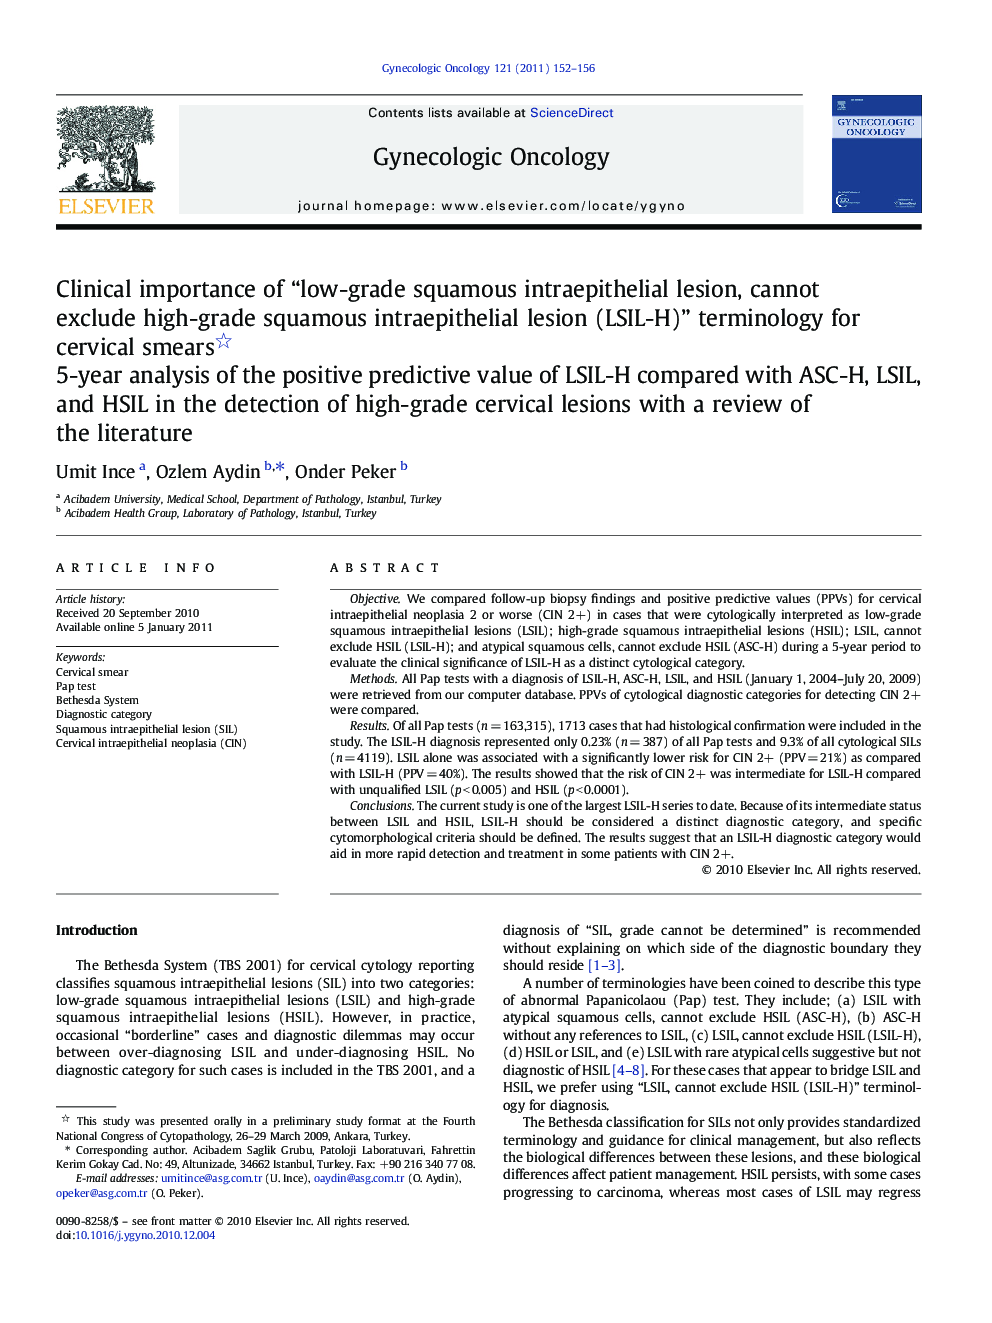 Clinical importance of “low-grade squamous intraepithelial lesion, cannot exclude high-grade squamous intraepithelial lesion (LSIL-H)” terminology for cervical smears: 5-year analysis of the positive predictive value of LSIL-H compared with ASC-H, LSI